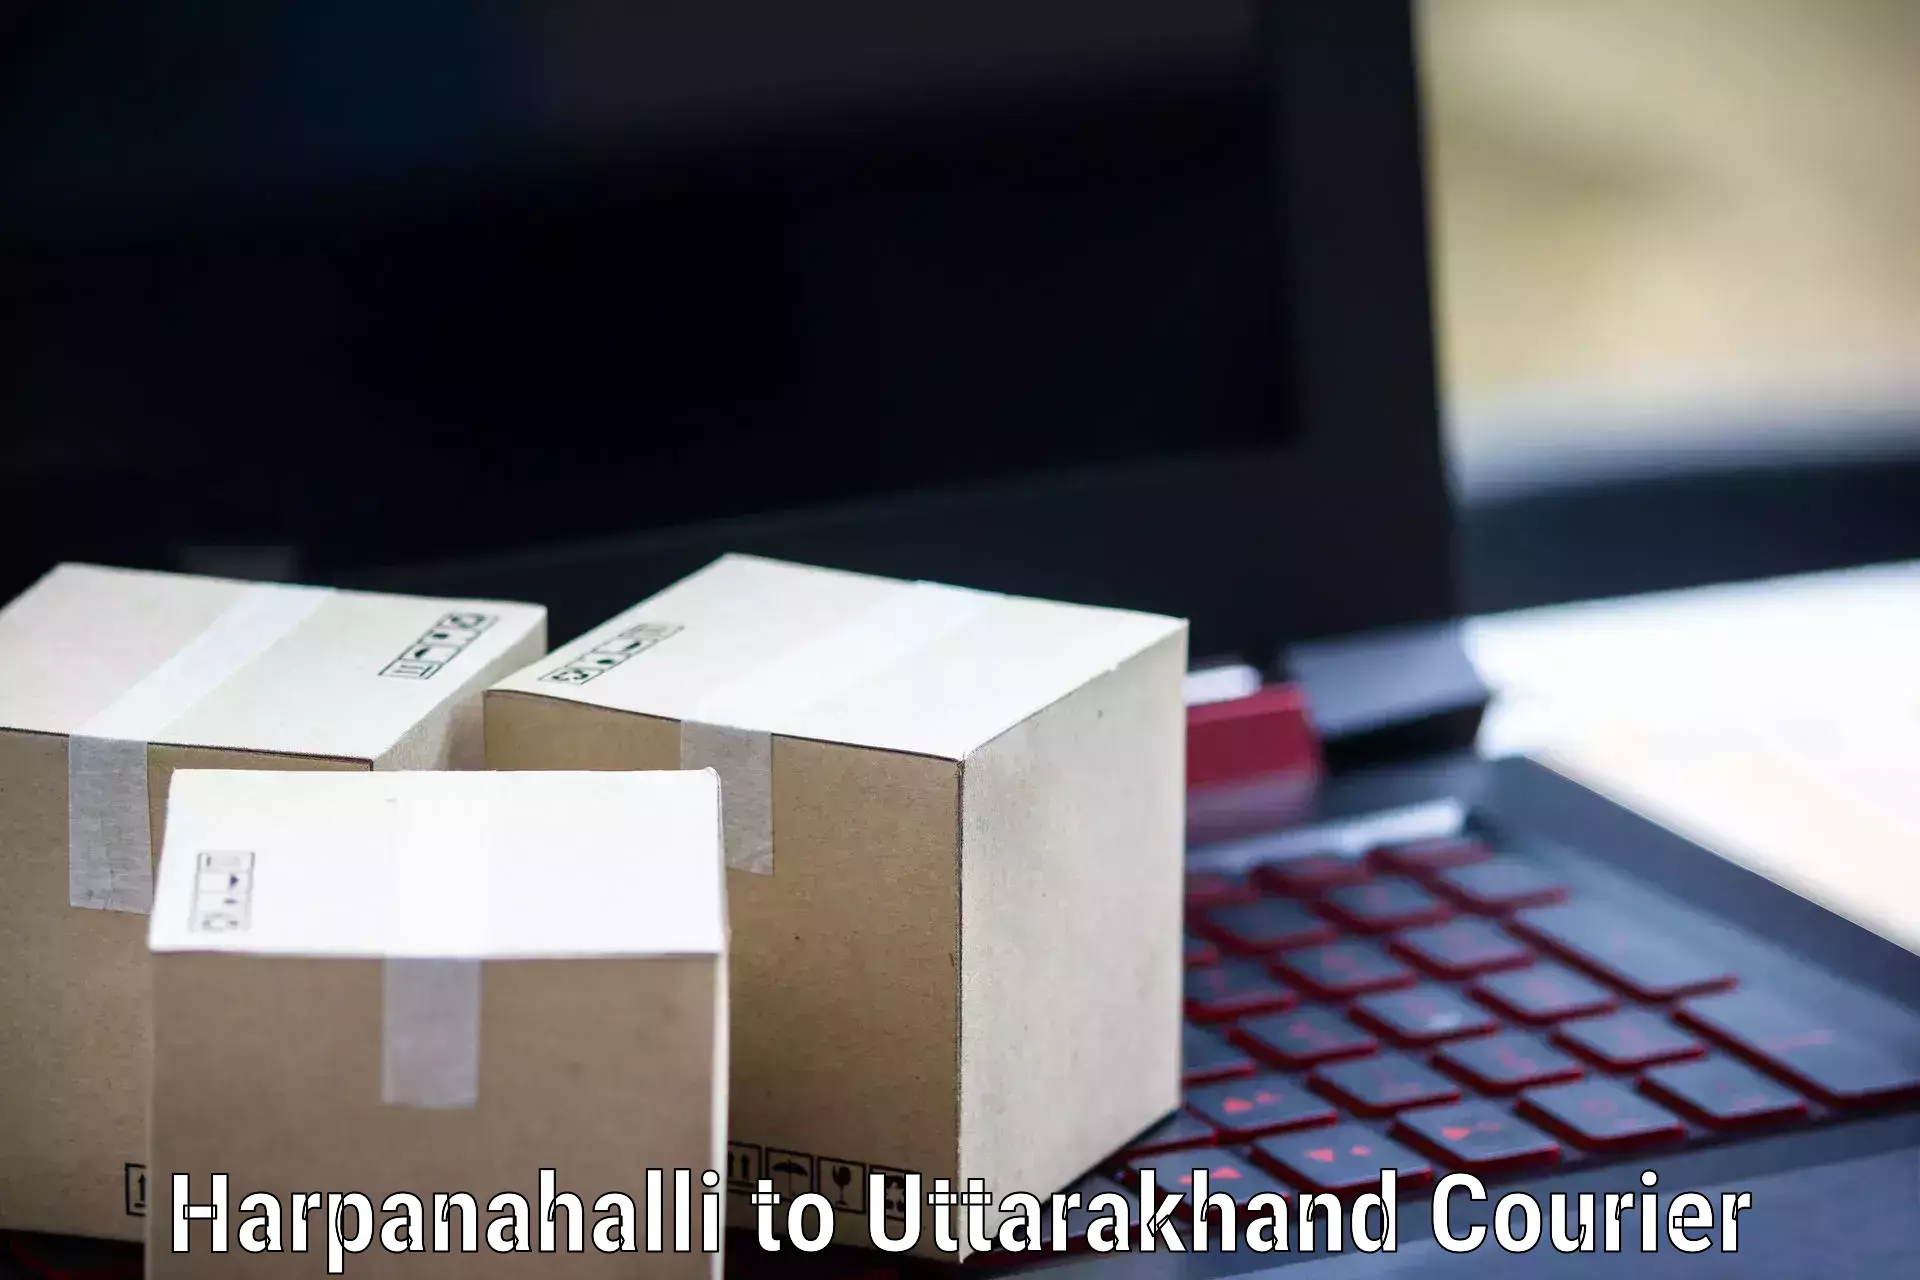 Reliable delivery network Harpanahalli to Rudrapur